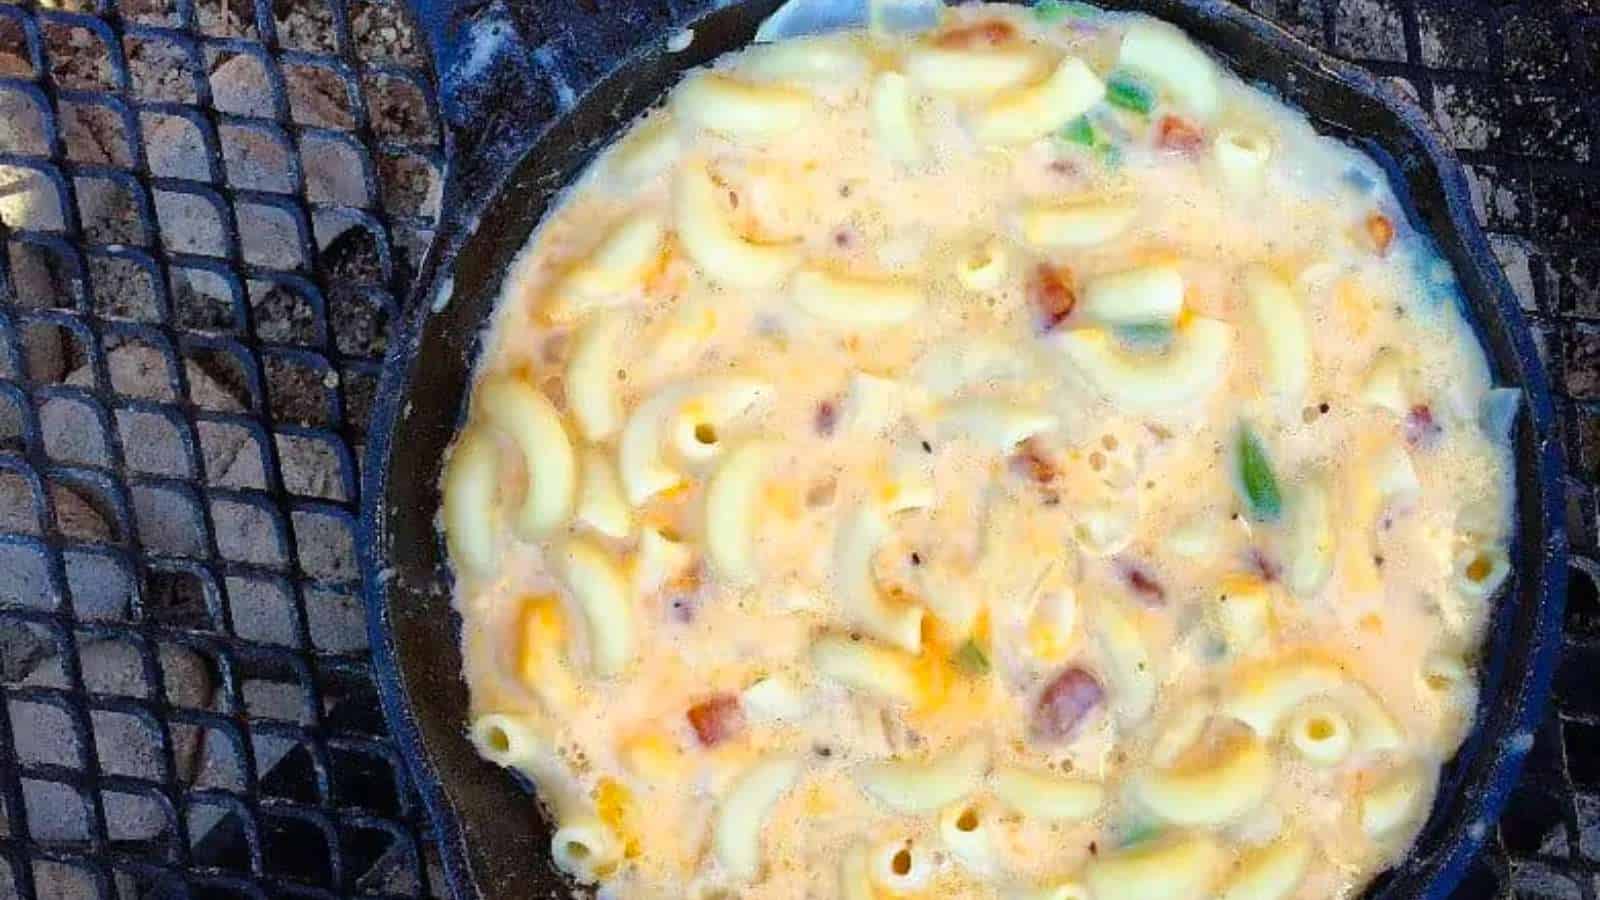 cast iron skillet of mac and cheese over a campfire.